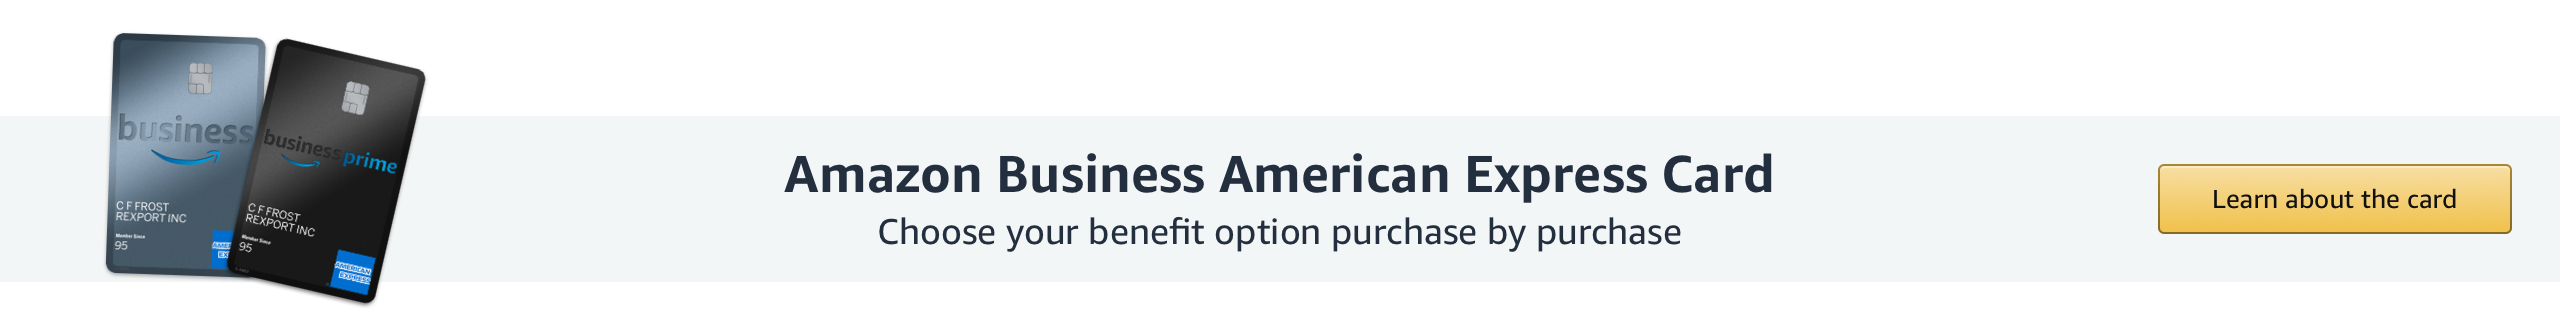 Amazon Business American Express Card. Choose your benefit option purchase by purchase. Learn about the card.